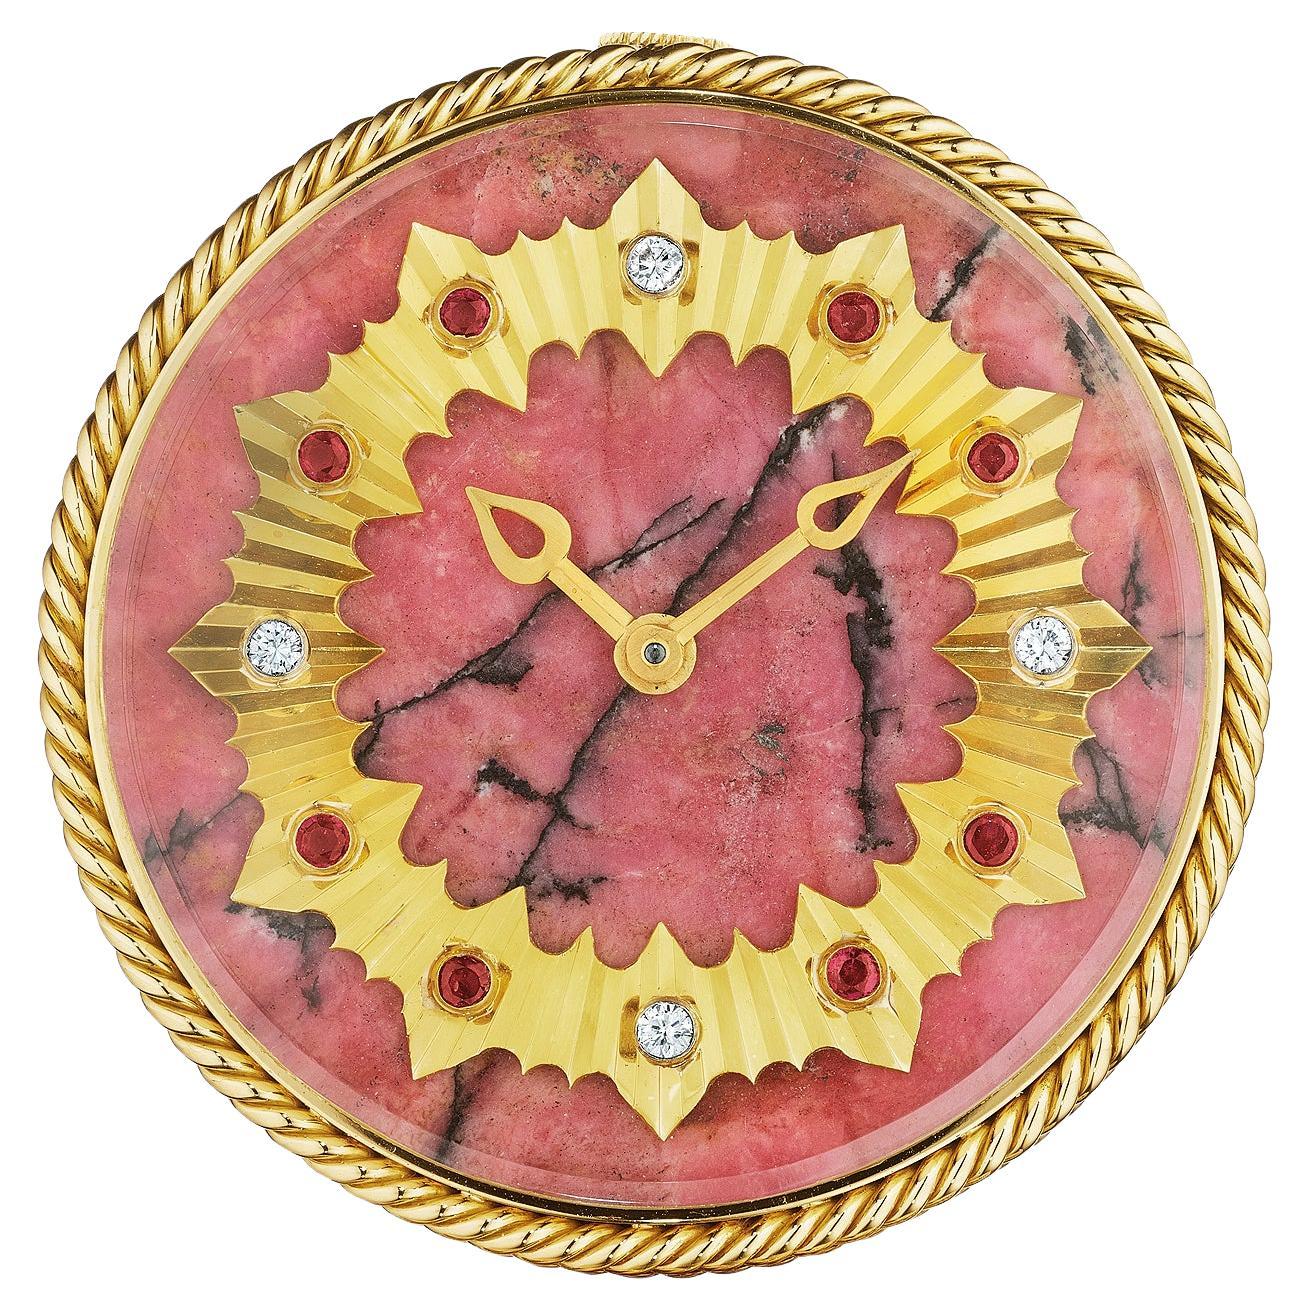 It is said that time is a luxury and this sumptuous Van Cleef & Arpels Paris vintage desk clock is the ultimate reminder.  With a lush pink rhodonite crystal face featuring a 18 karat yellow gold circular ruby and diamond encrusted crown, this clock